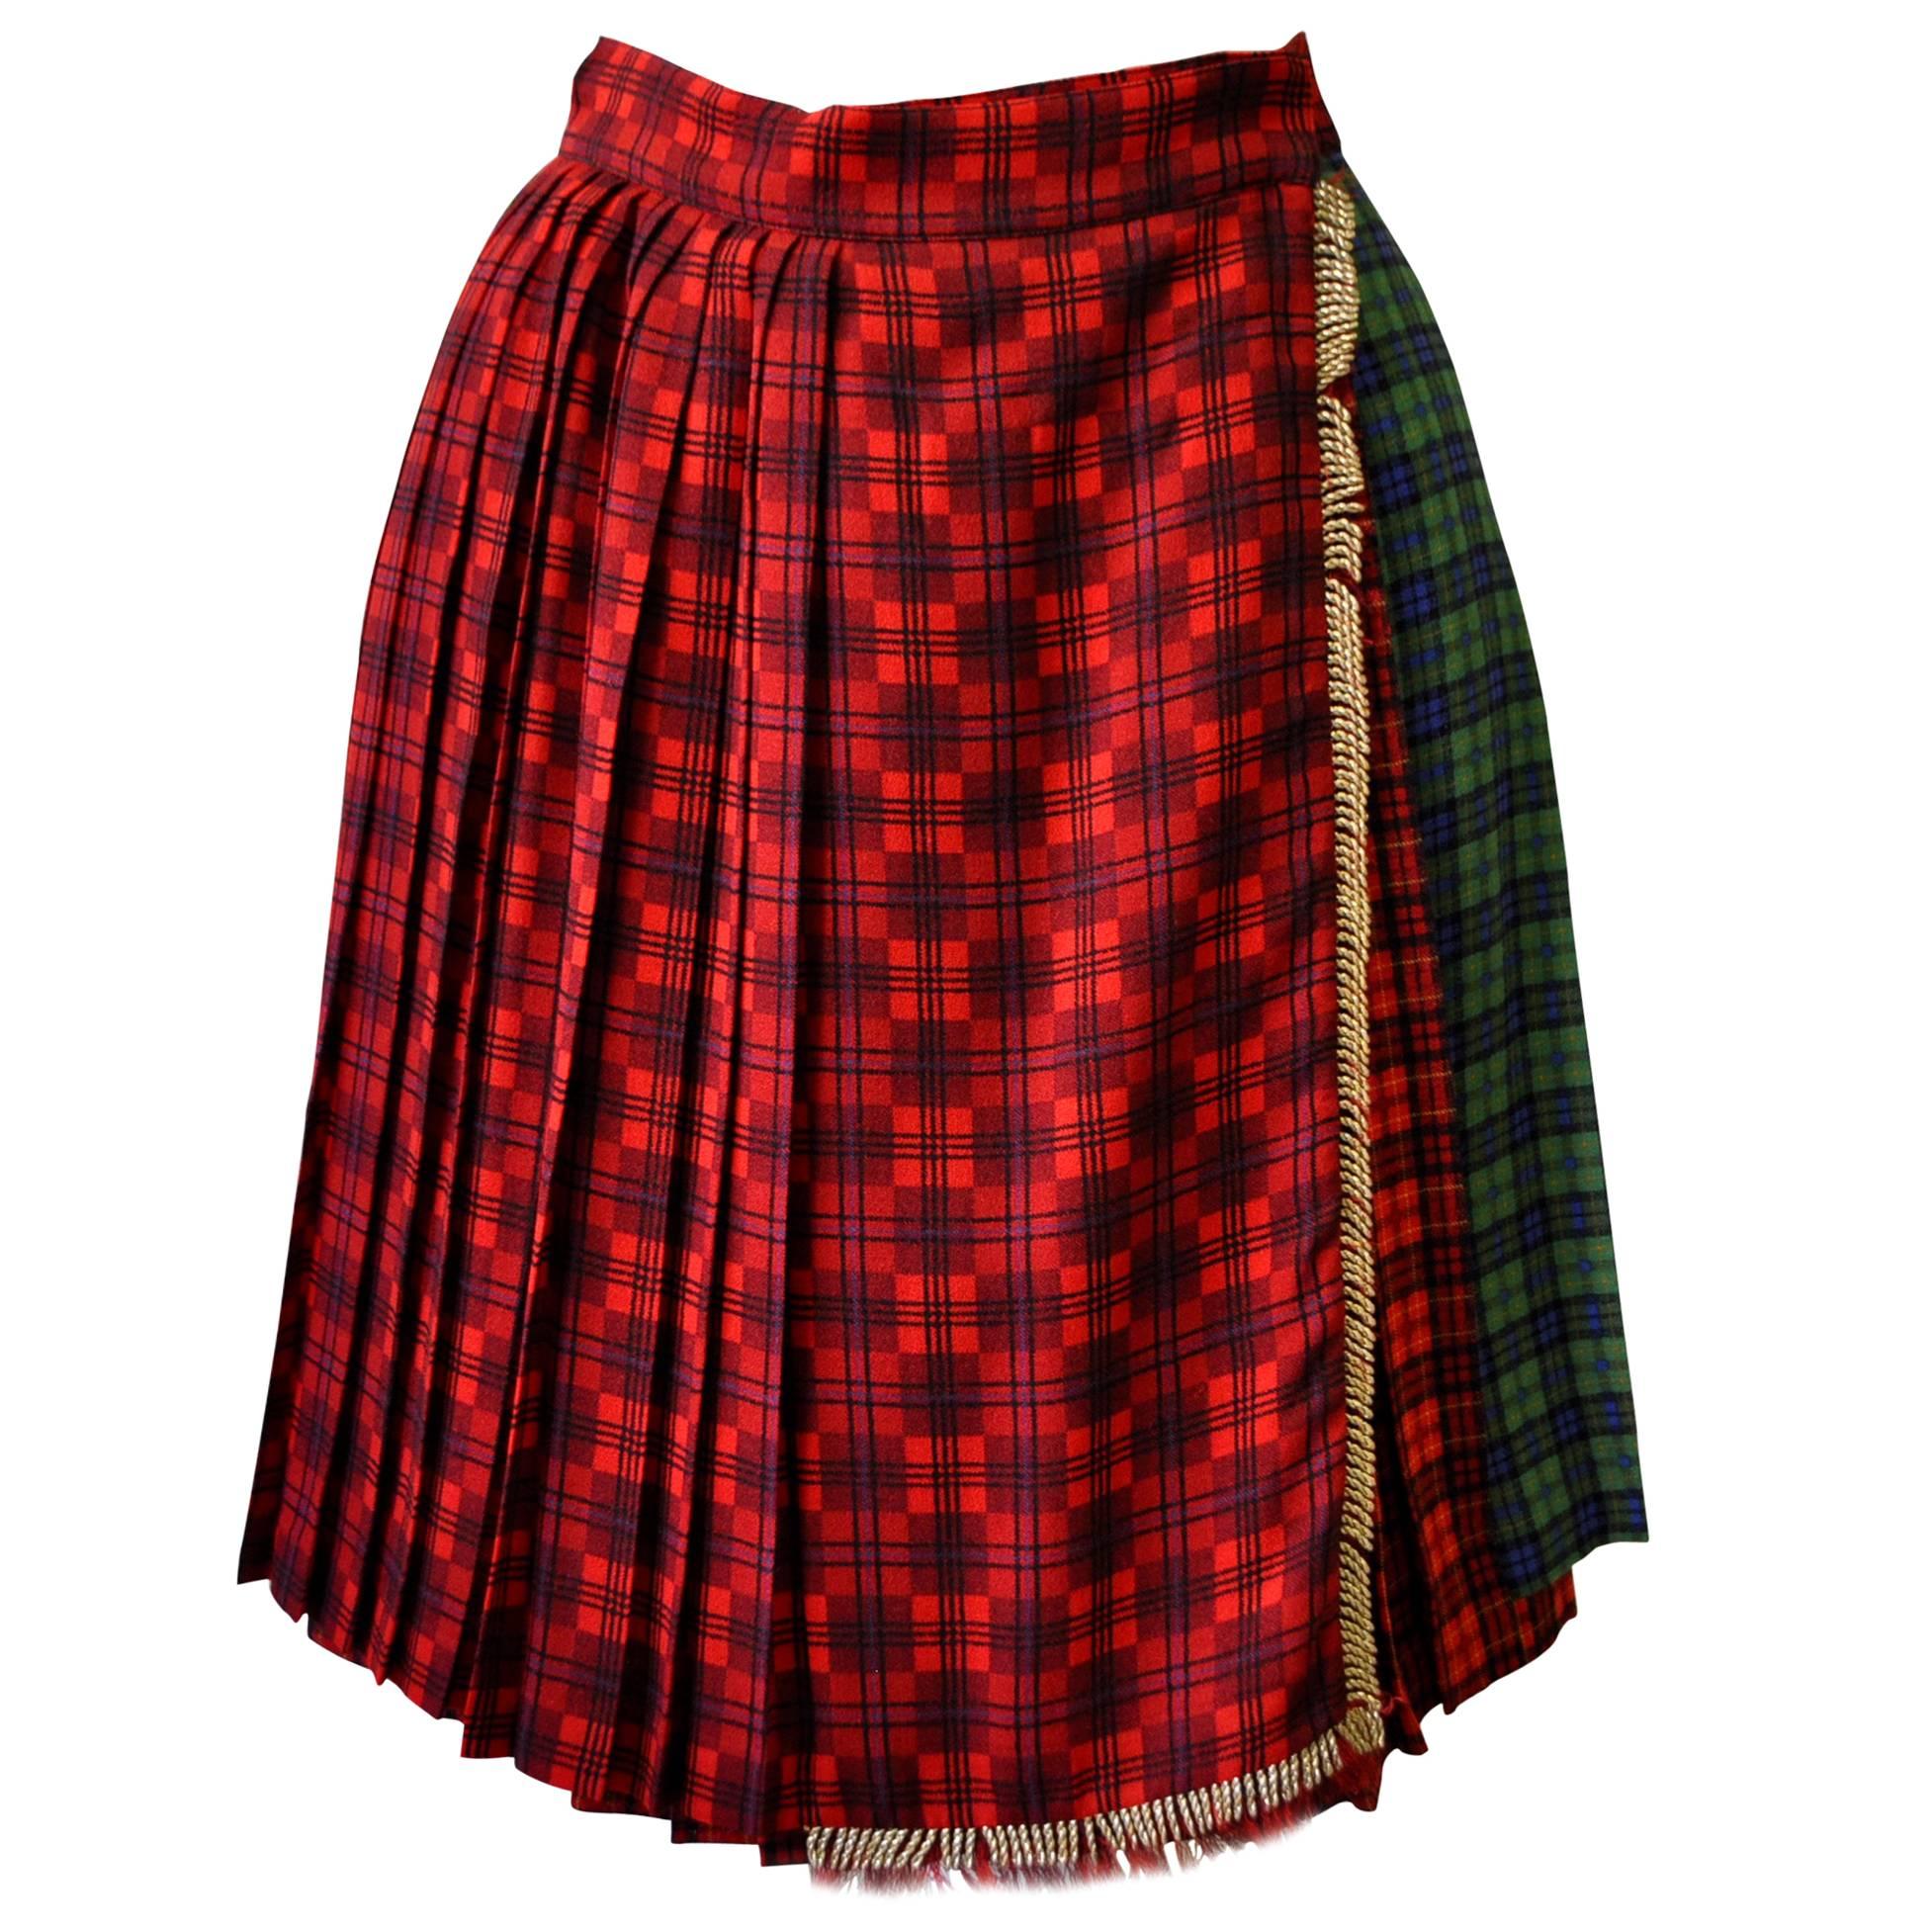 Important Gianni Versace Couture Bondage Collection Tartan Wrap Skirt For Sale